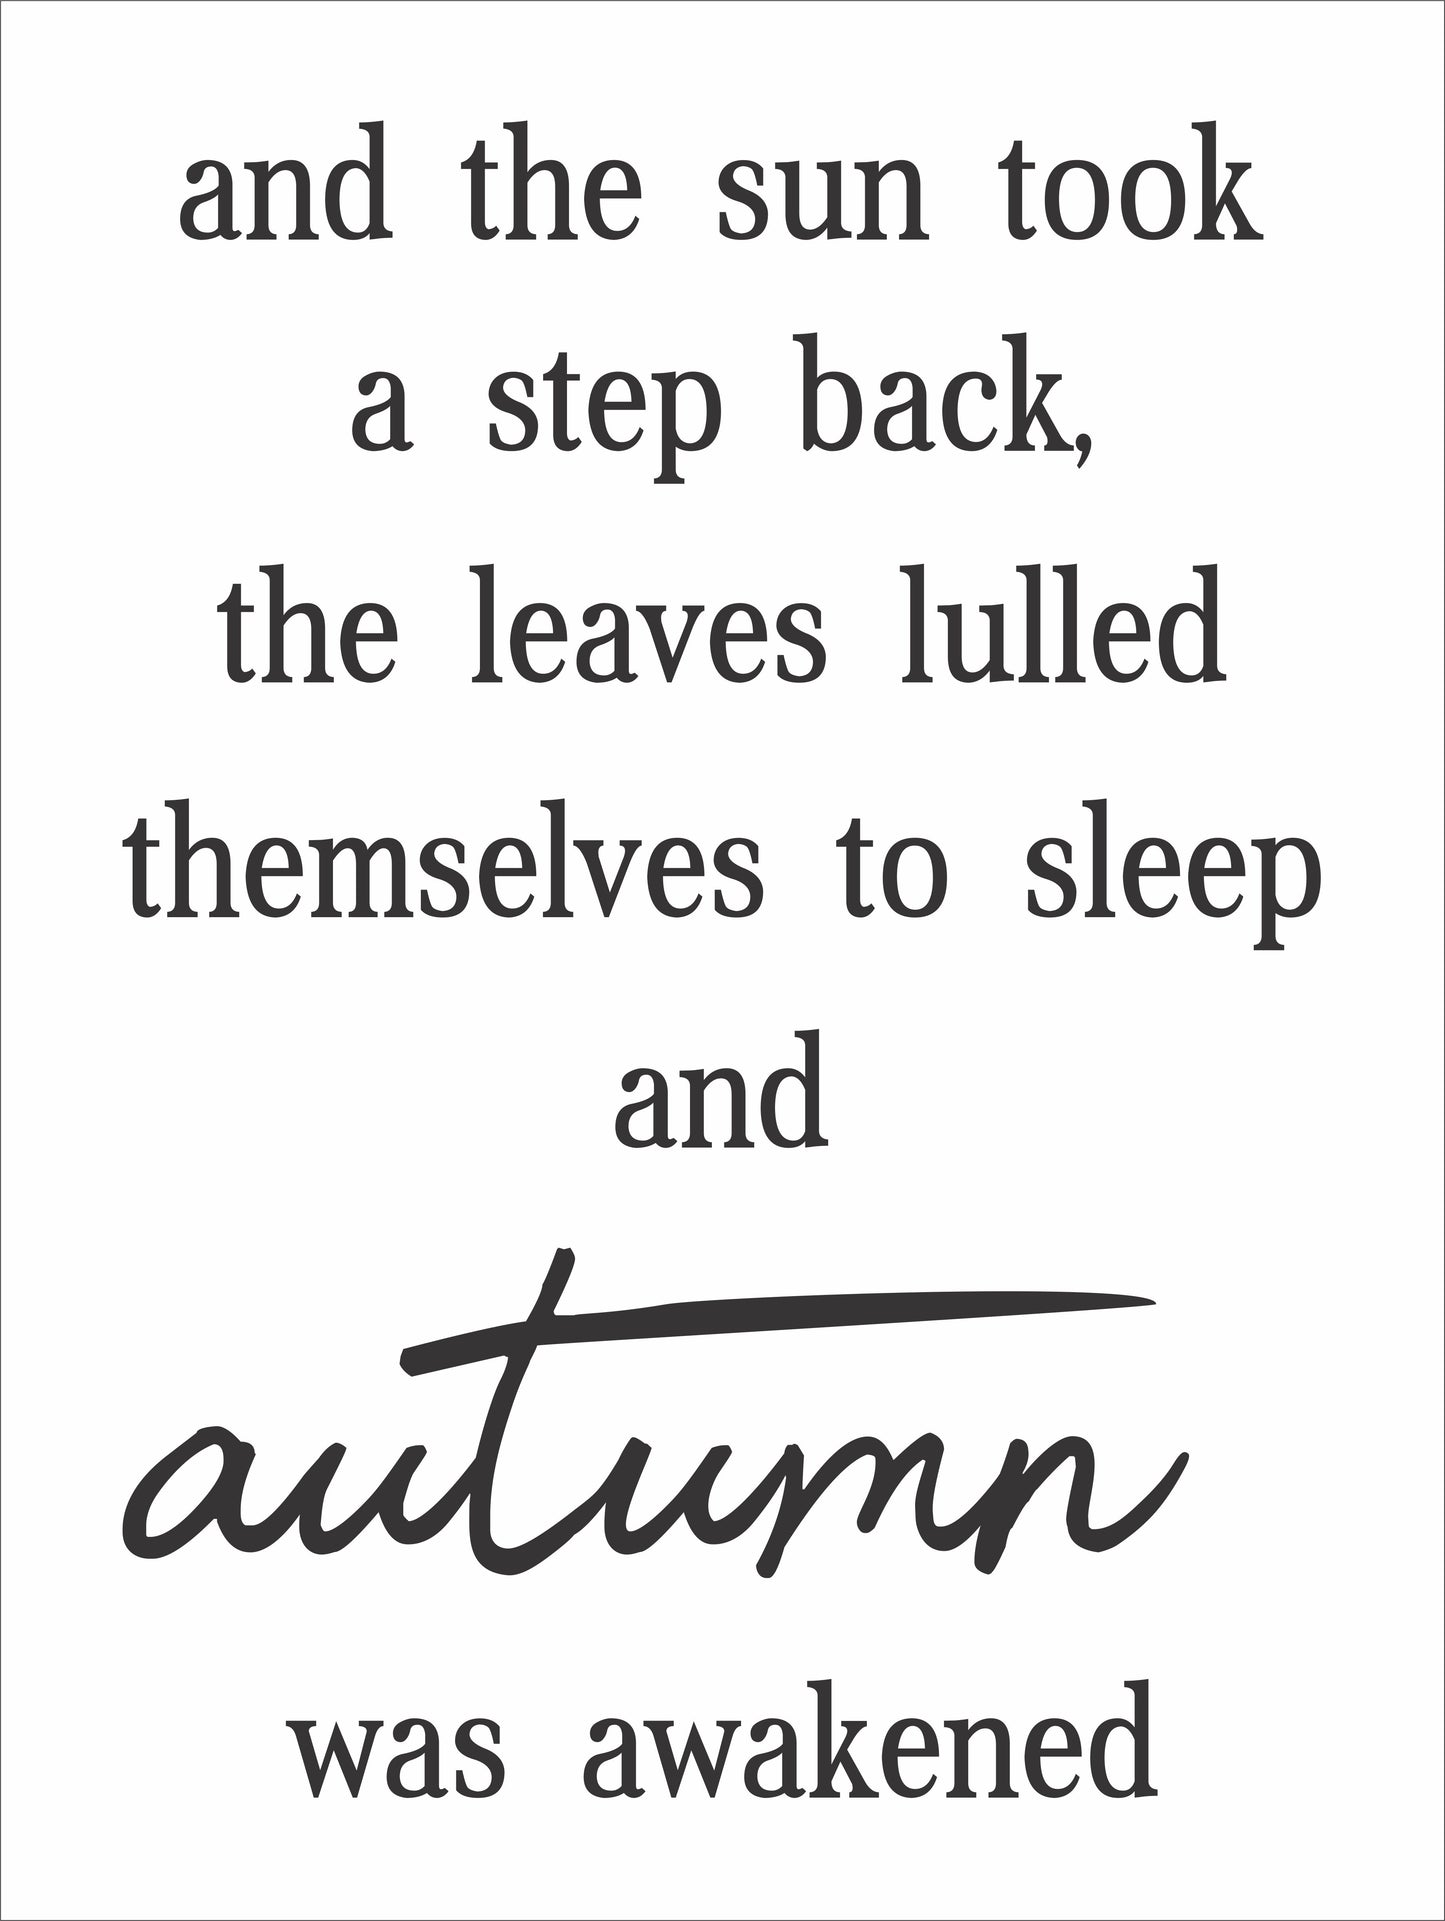 Fall Stencil - And the Sun took a step back - REUSABLE- 6 Sizes - Create Fall Signs